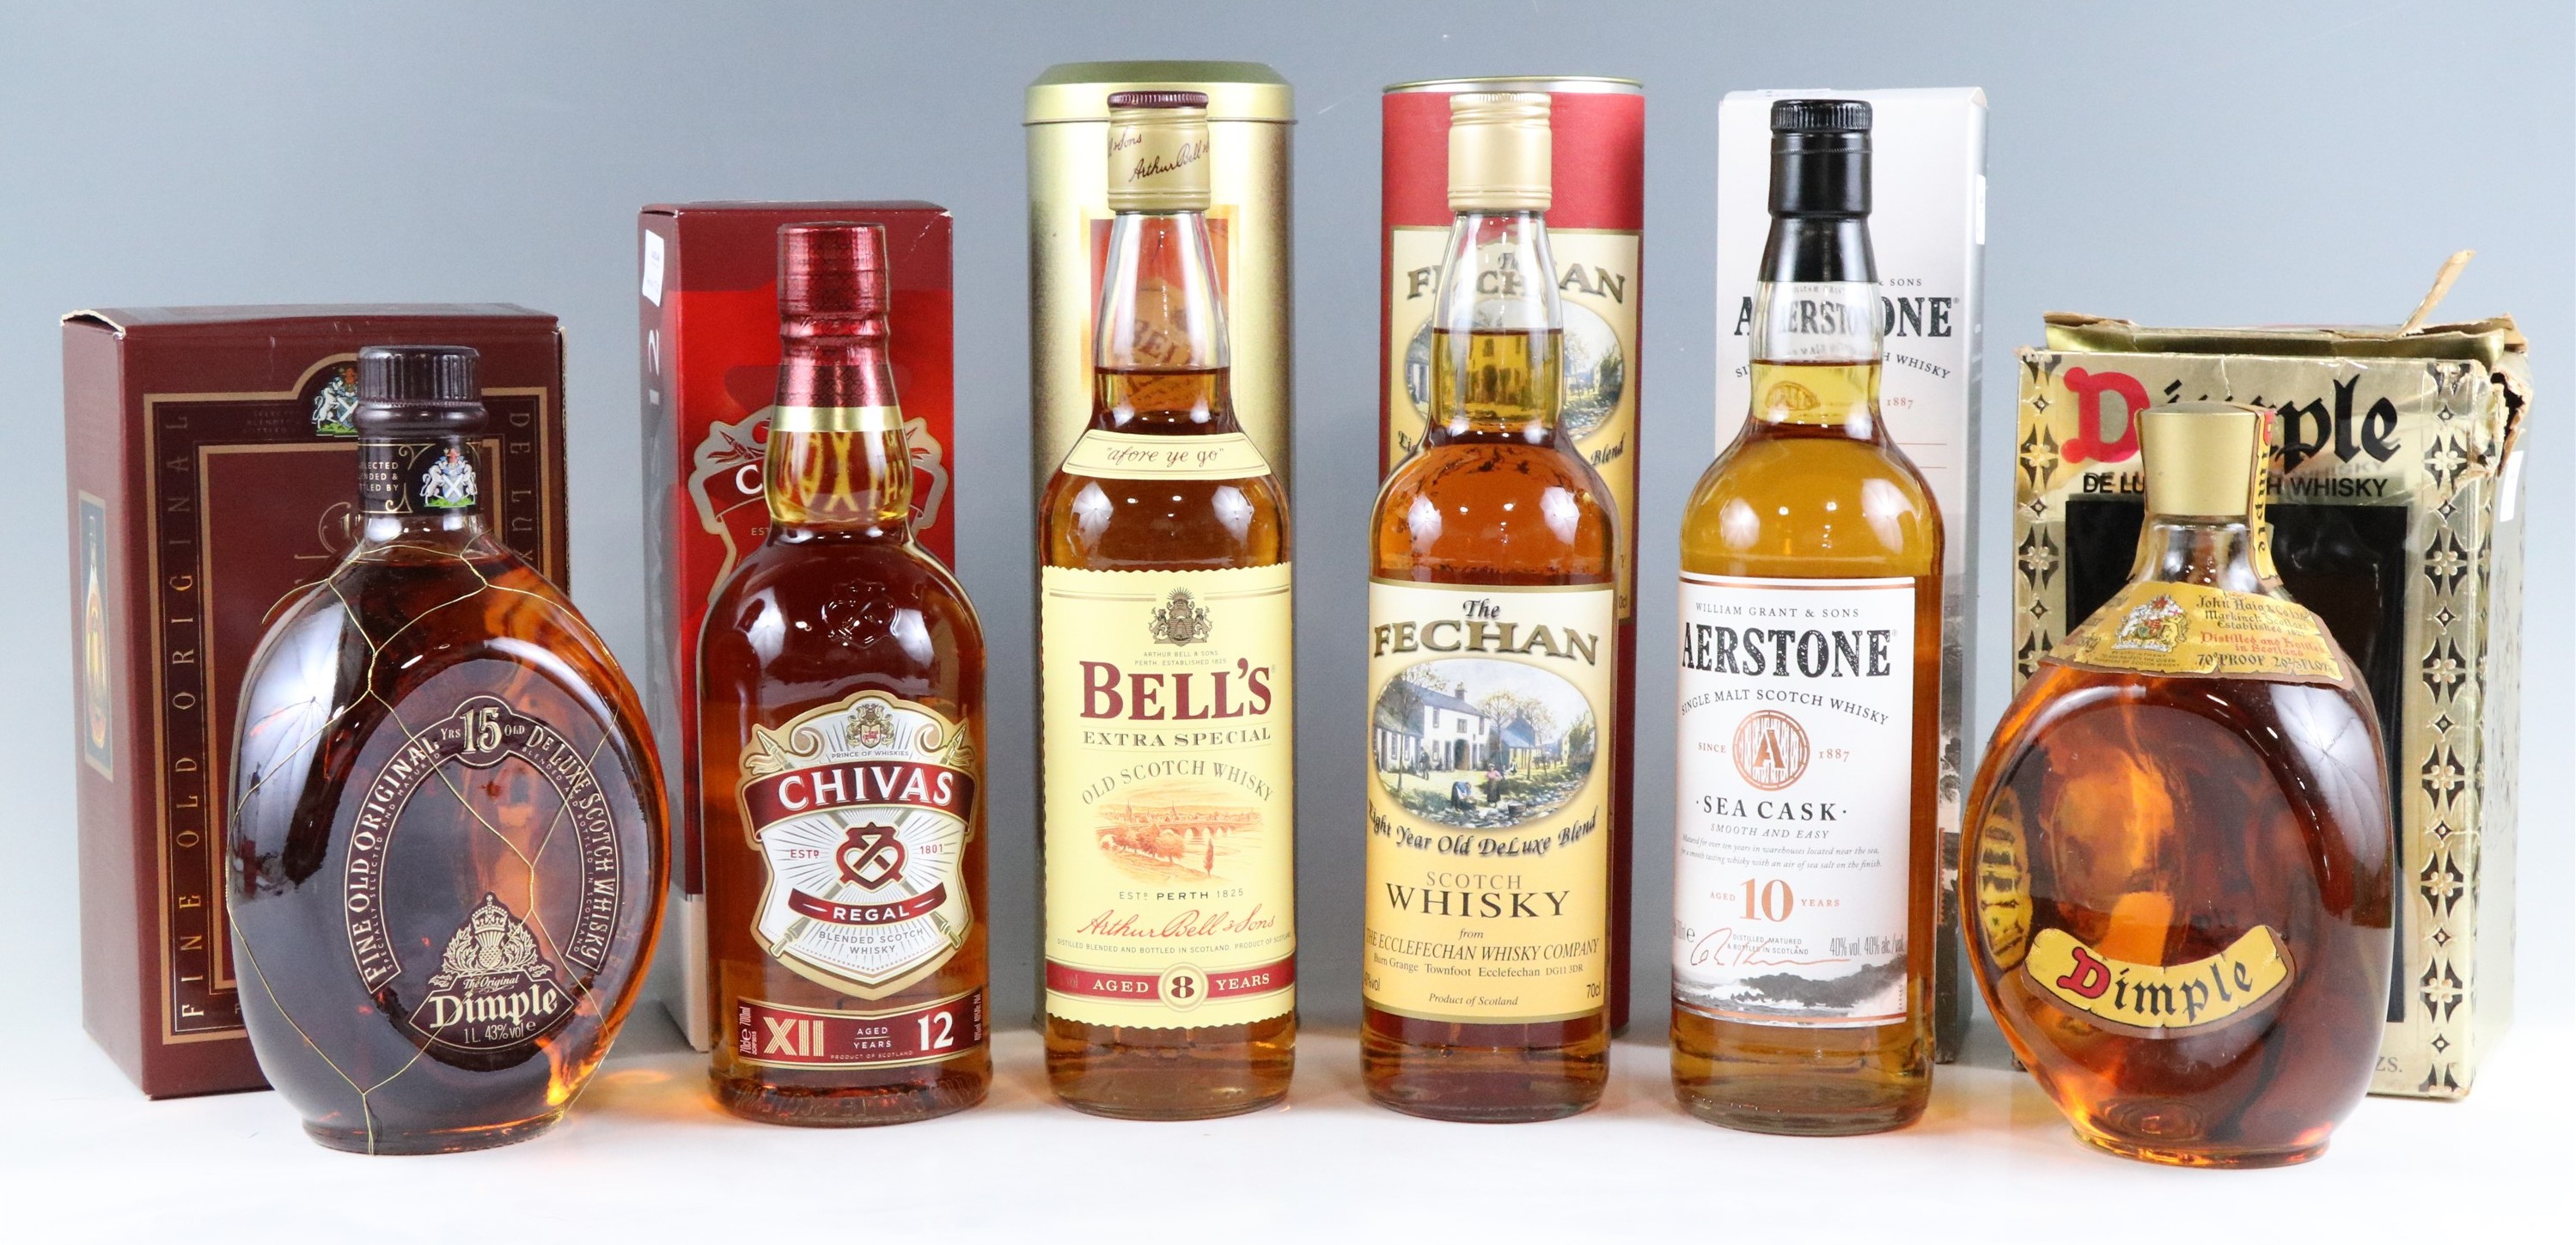 Six bottles of boxed whisky, comprising Dimple 15 Years Old and De Luxe, Bell's, Aerstone Sea